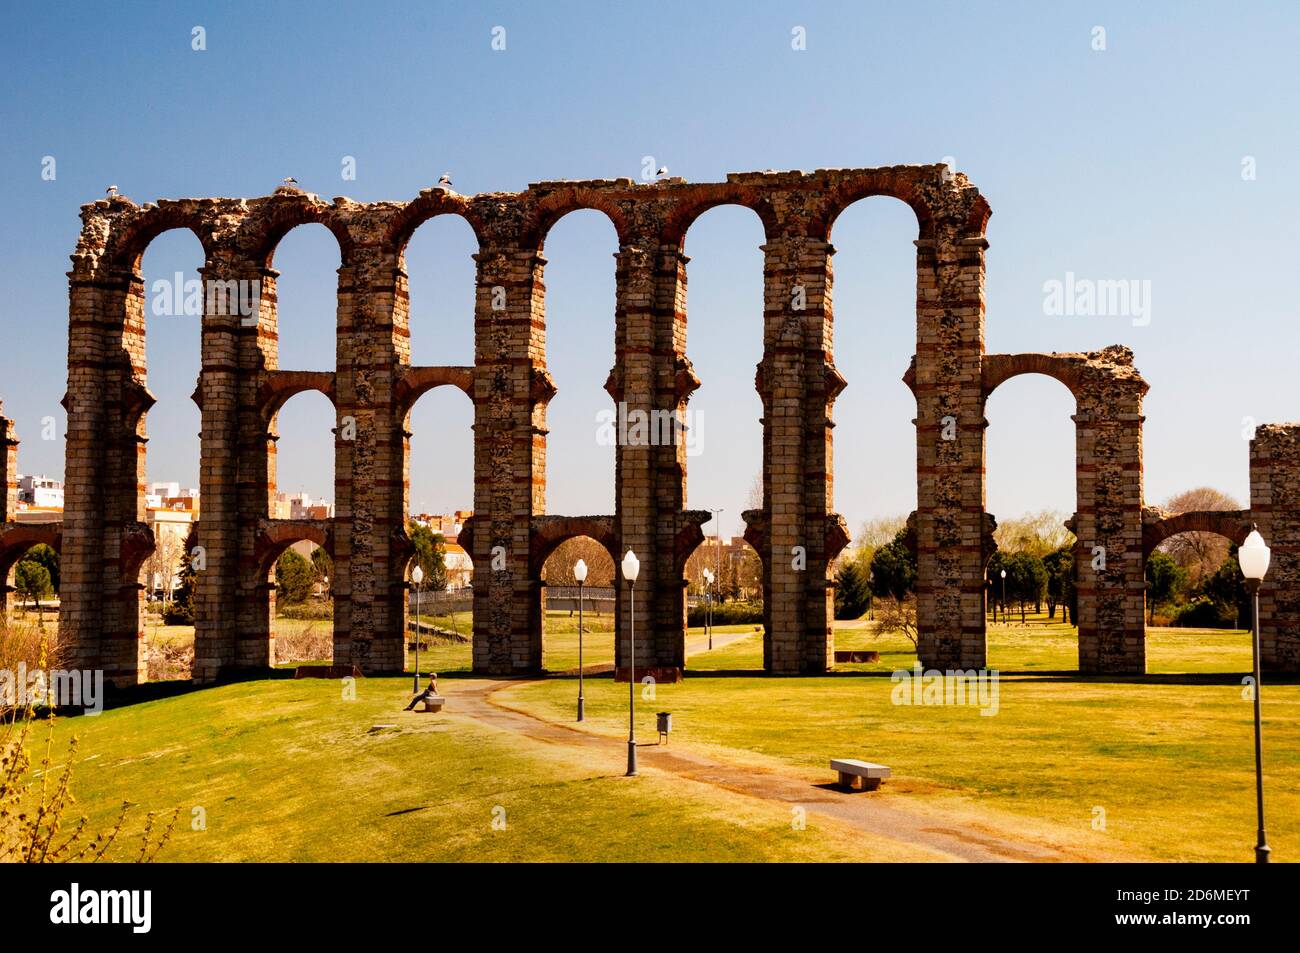 Residents of Mérida call the Los Milagros Aqueduct 'Miraculous Aqueduct' for the awe it inspires, Spain. Stock Photo